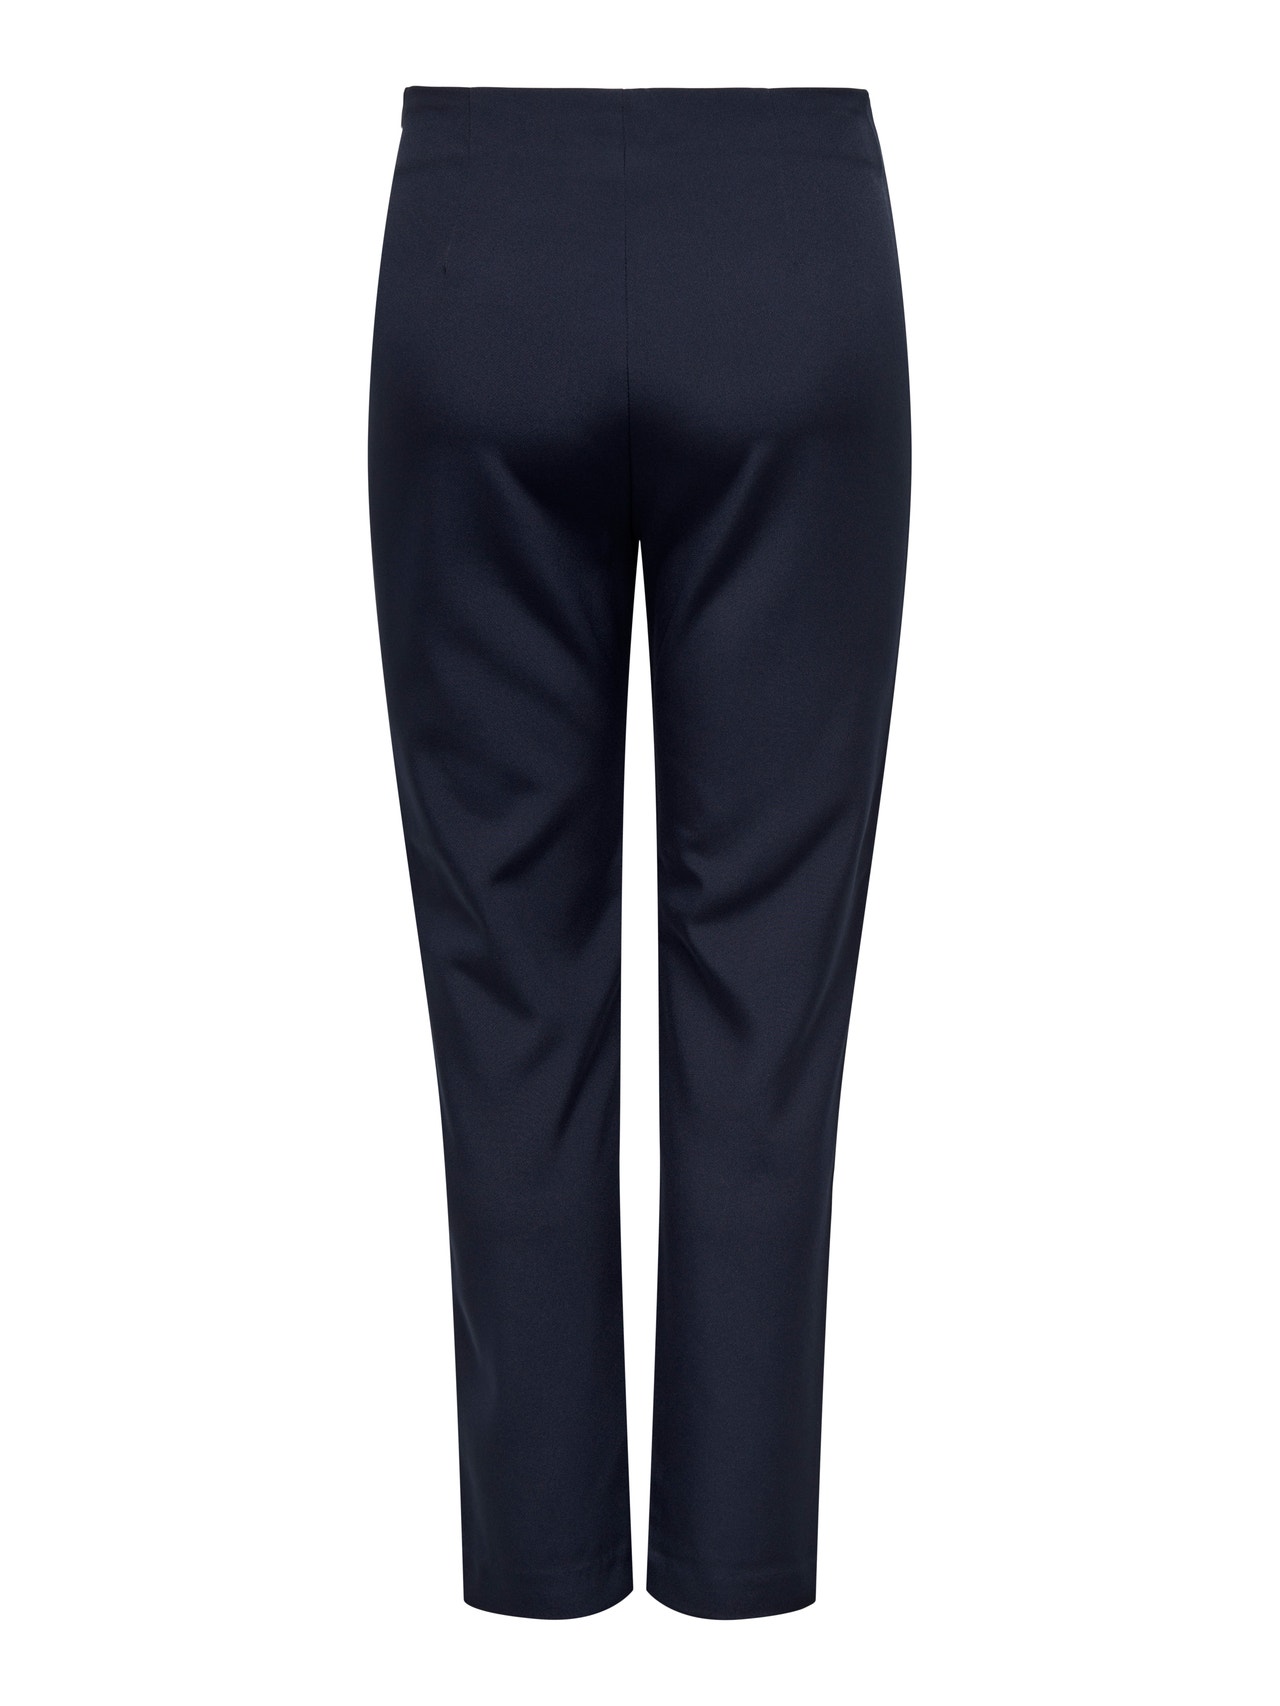 ONLY Slim Fit Hohe Taille Hose -Night Sky - 15279201